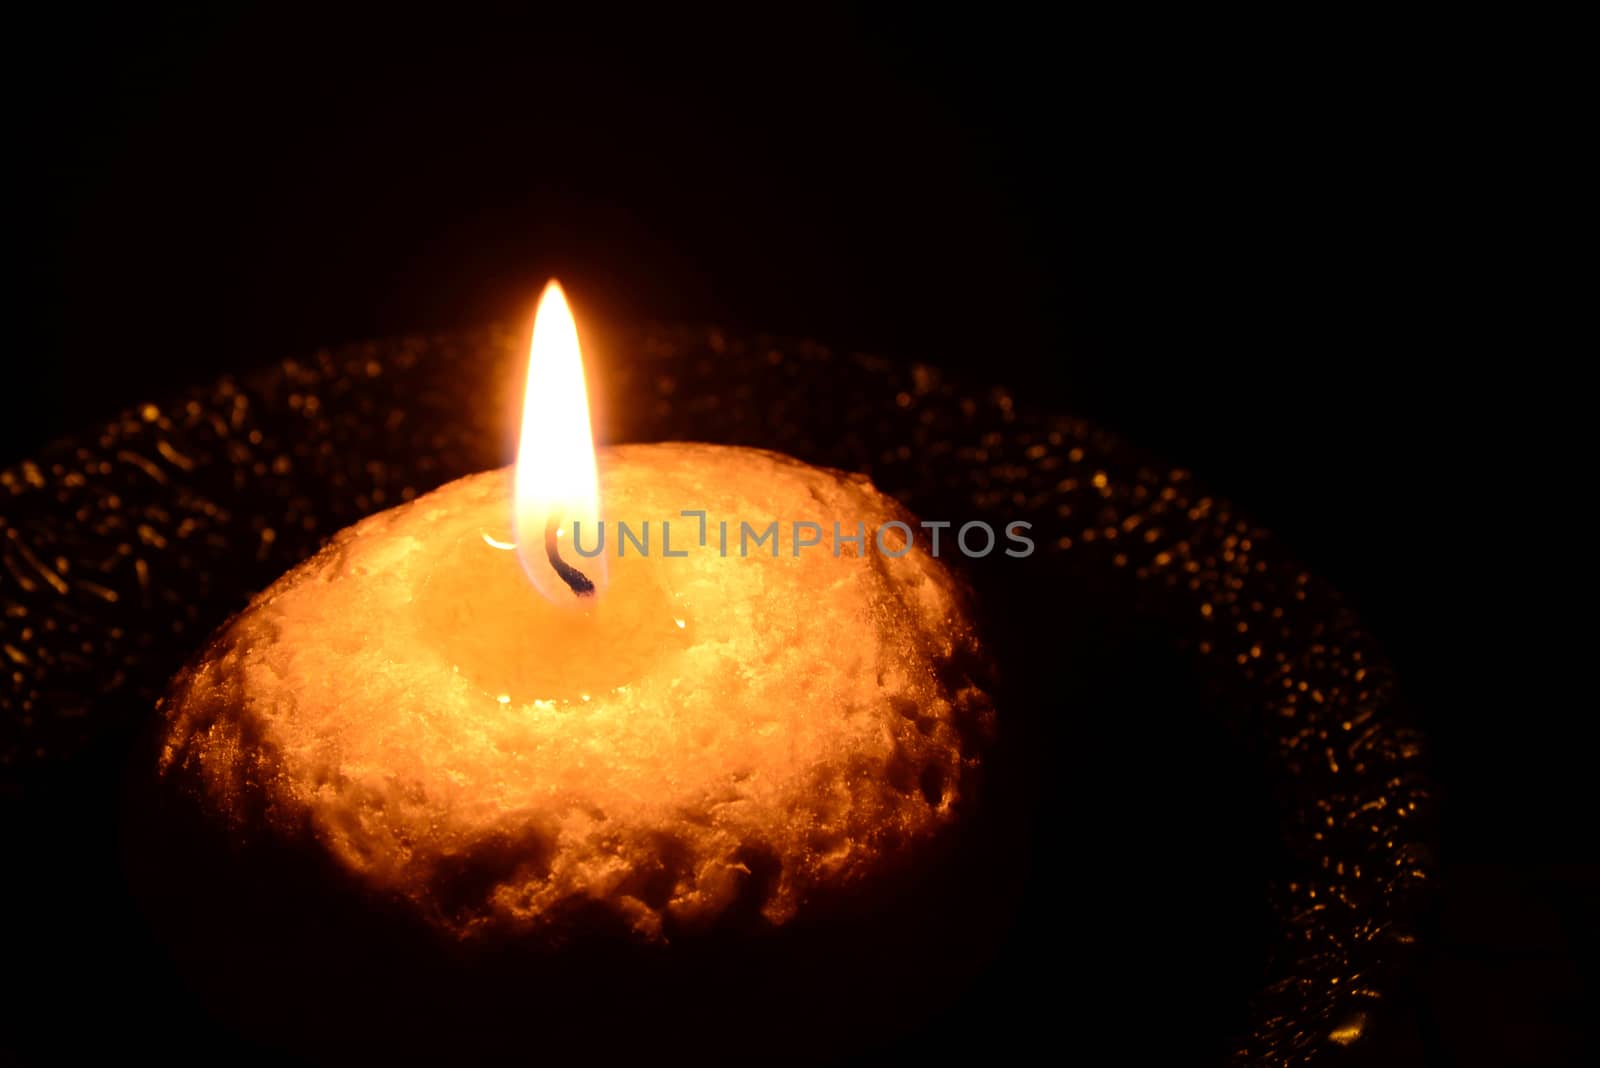 White candle on a plate burning on a black background by dk_photos